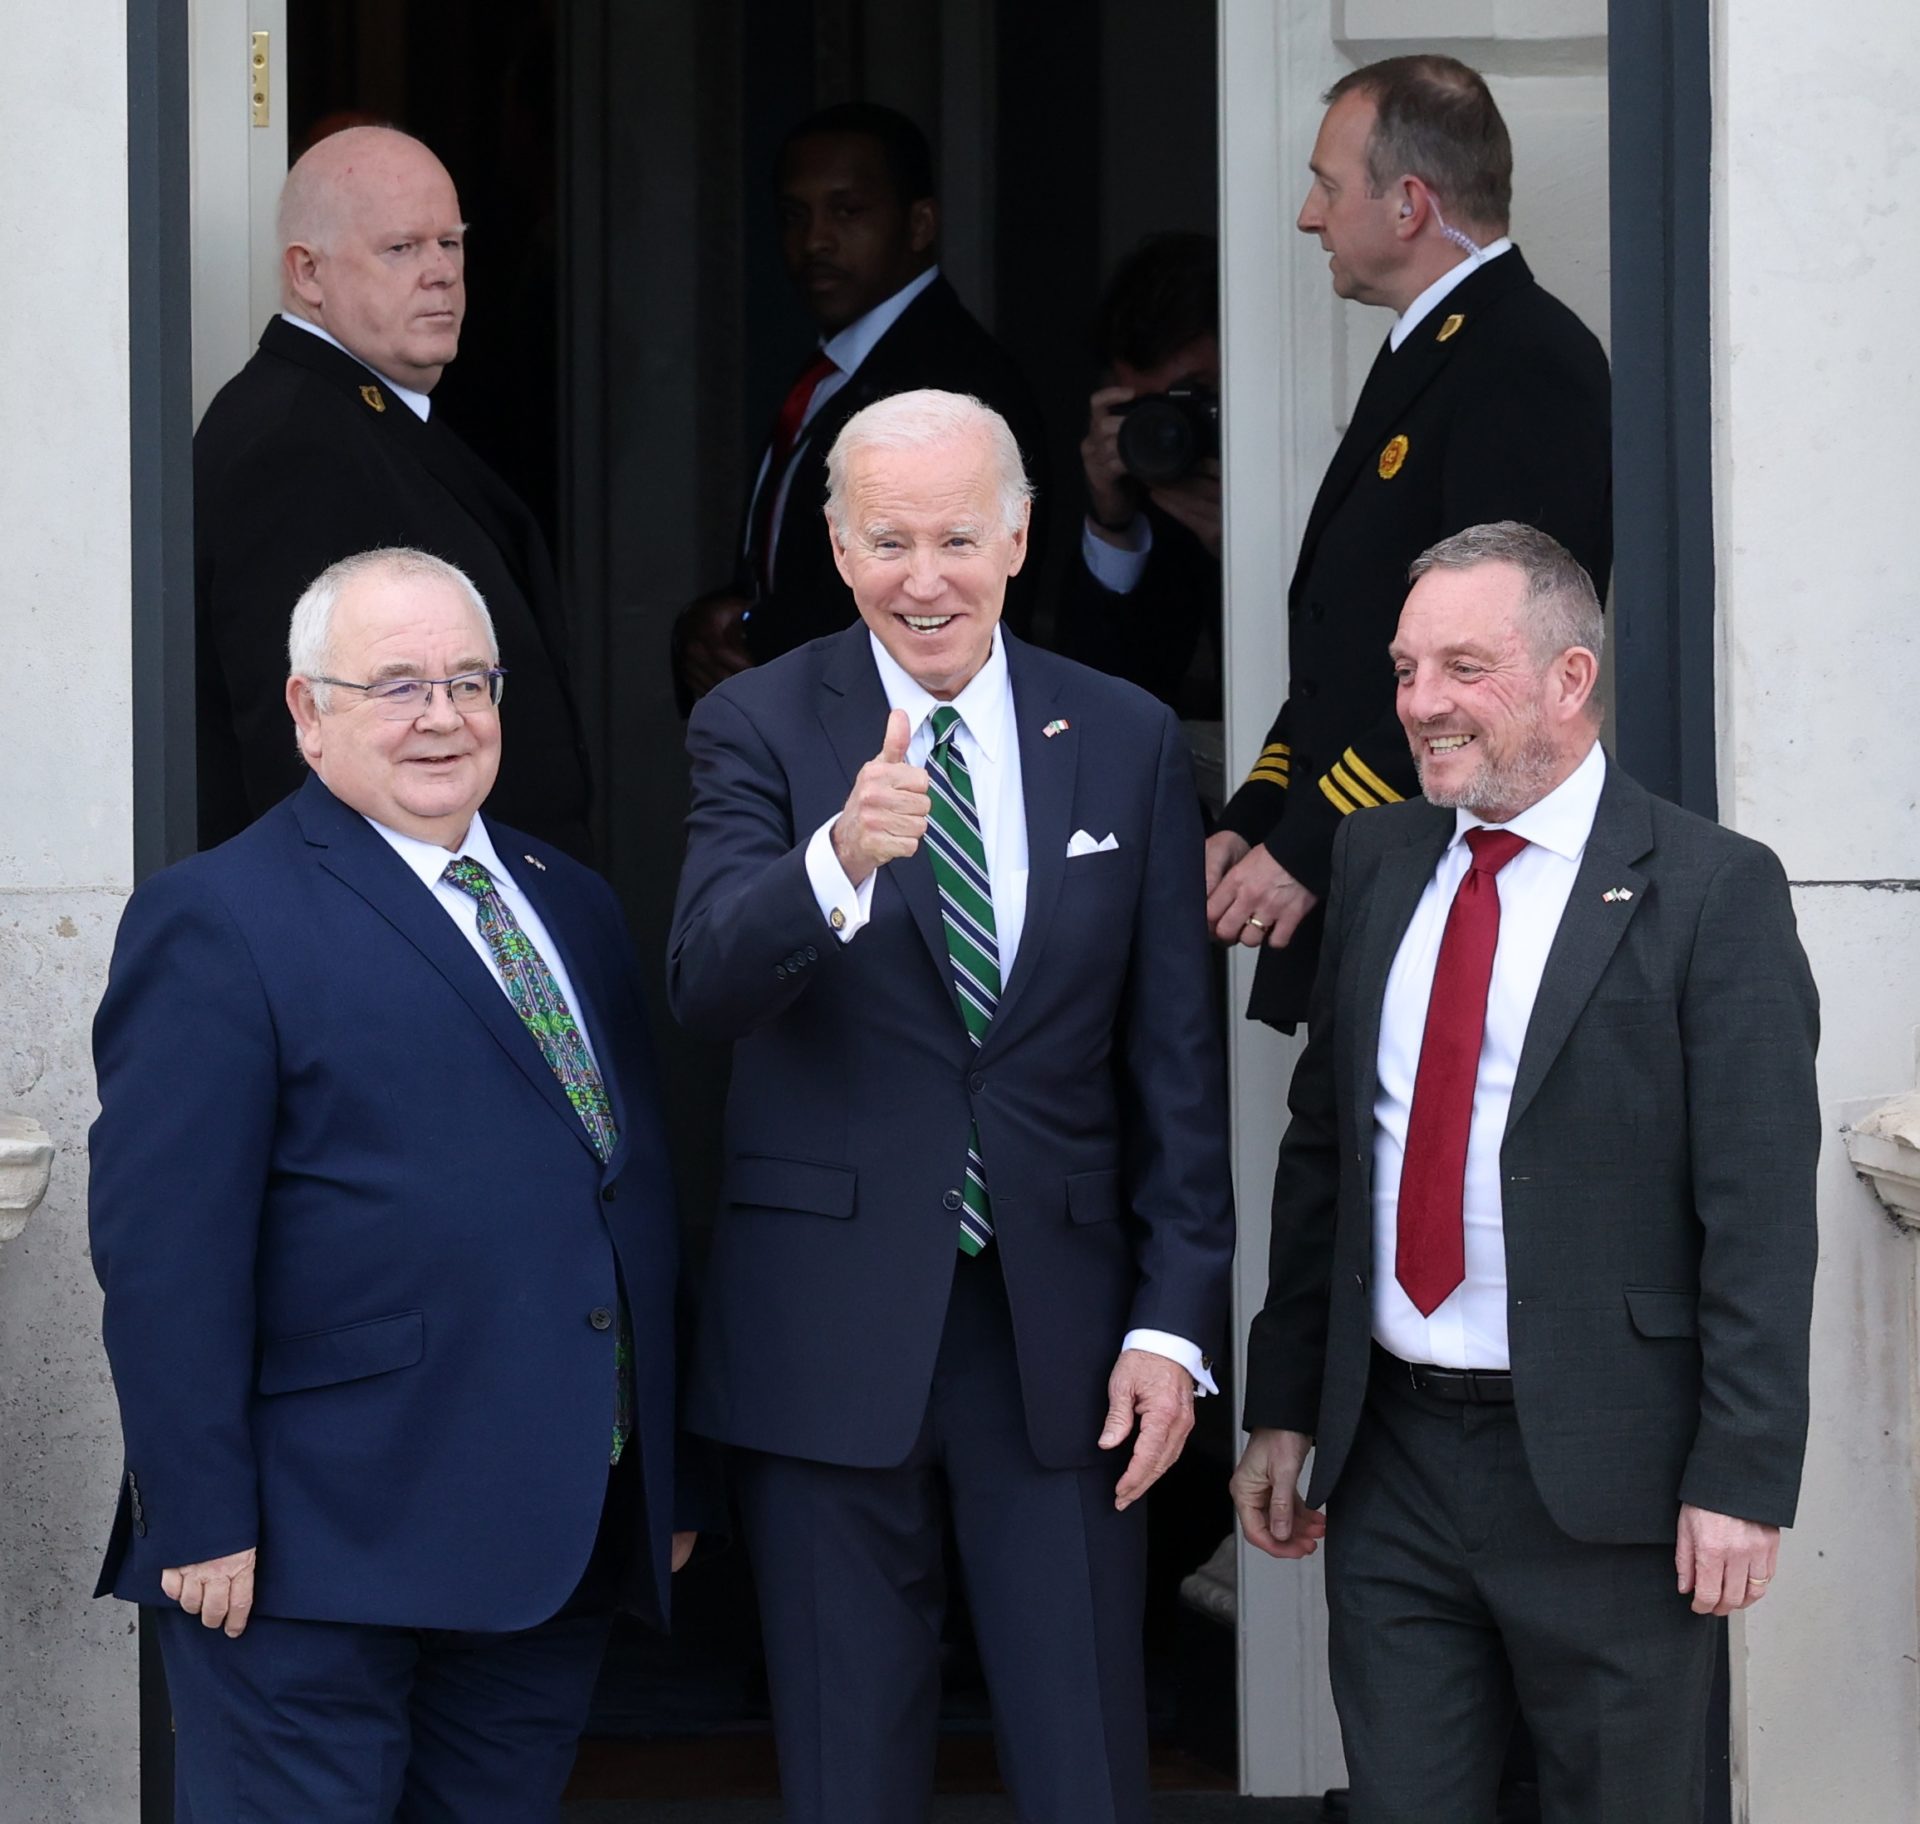 US President Joe Biden arriving at Leinster House for a speech to the Joint Houses of the Oireachtas.